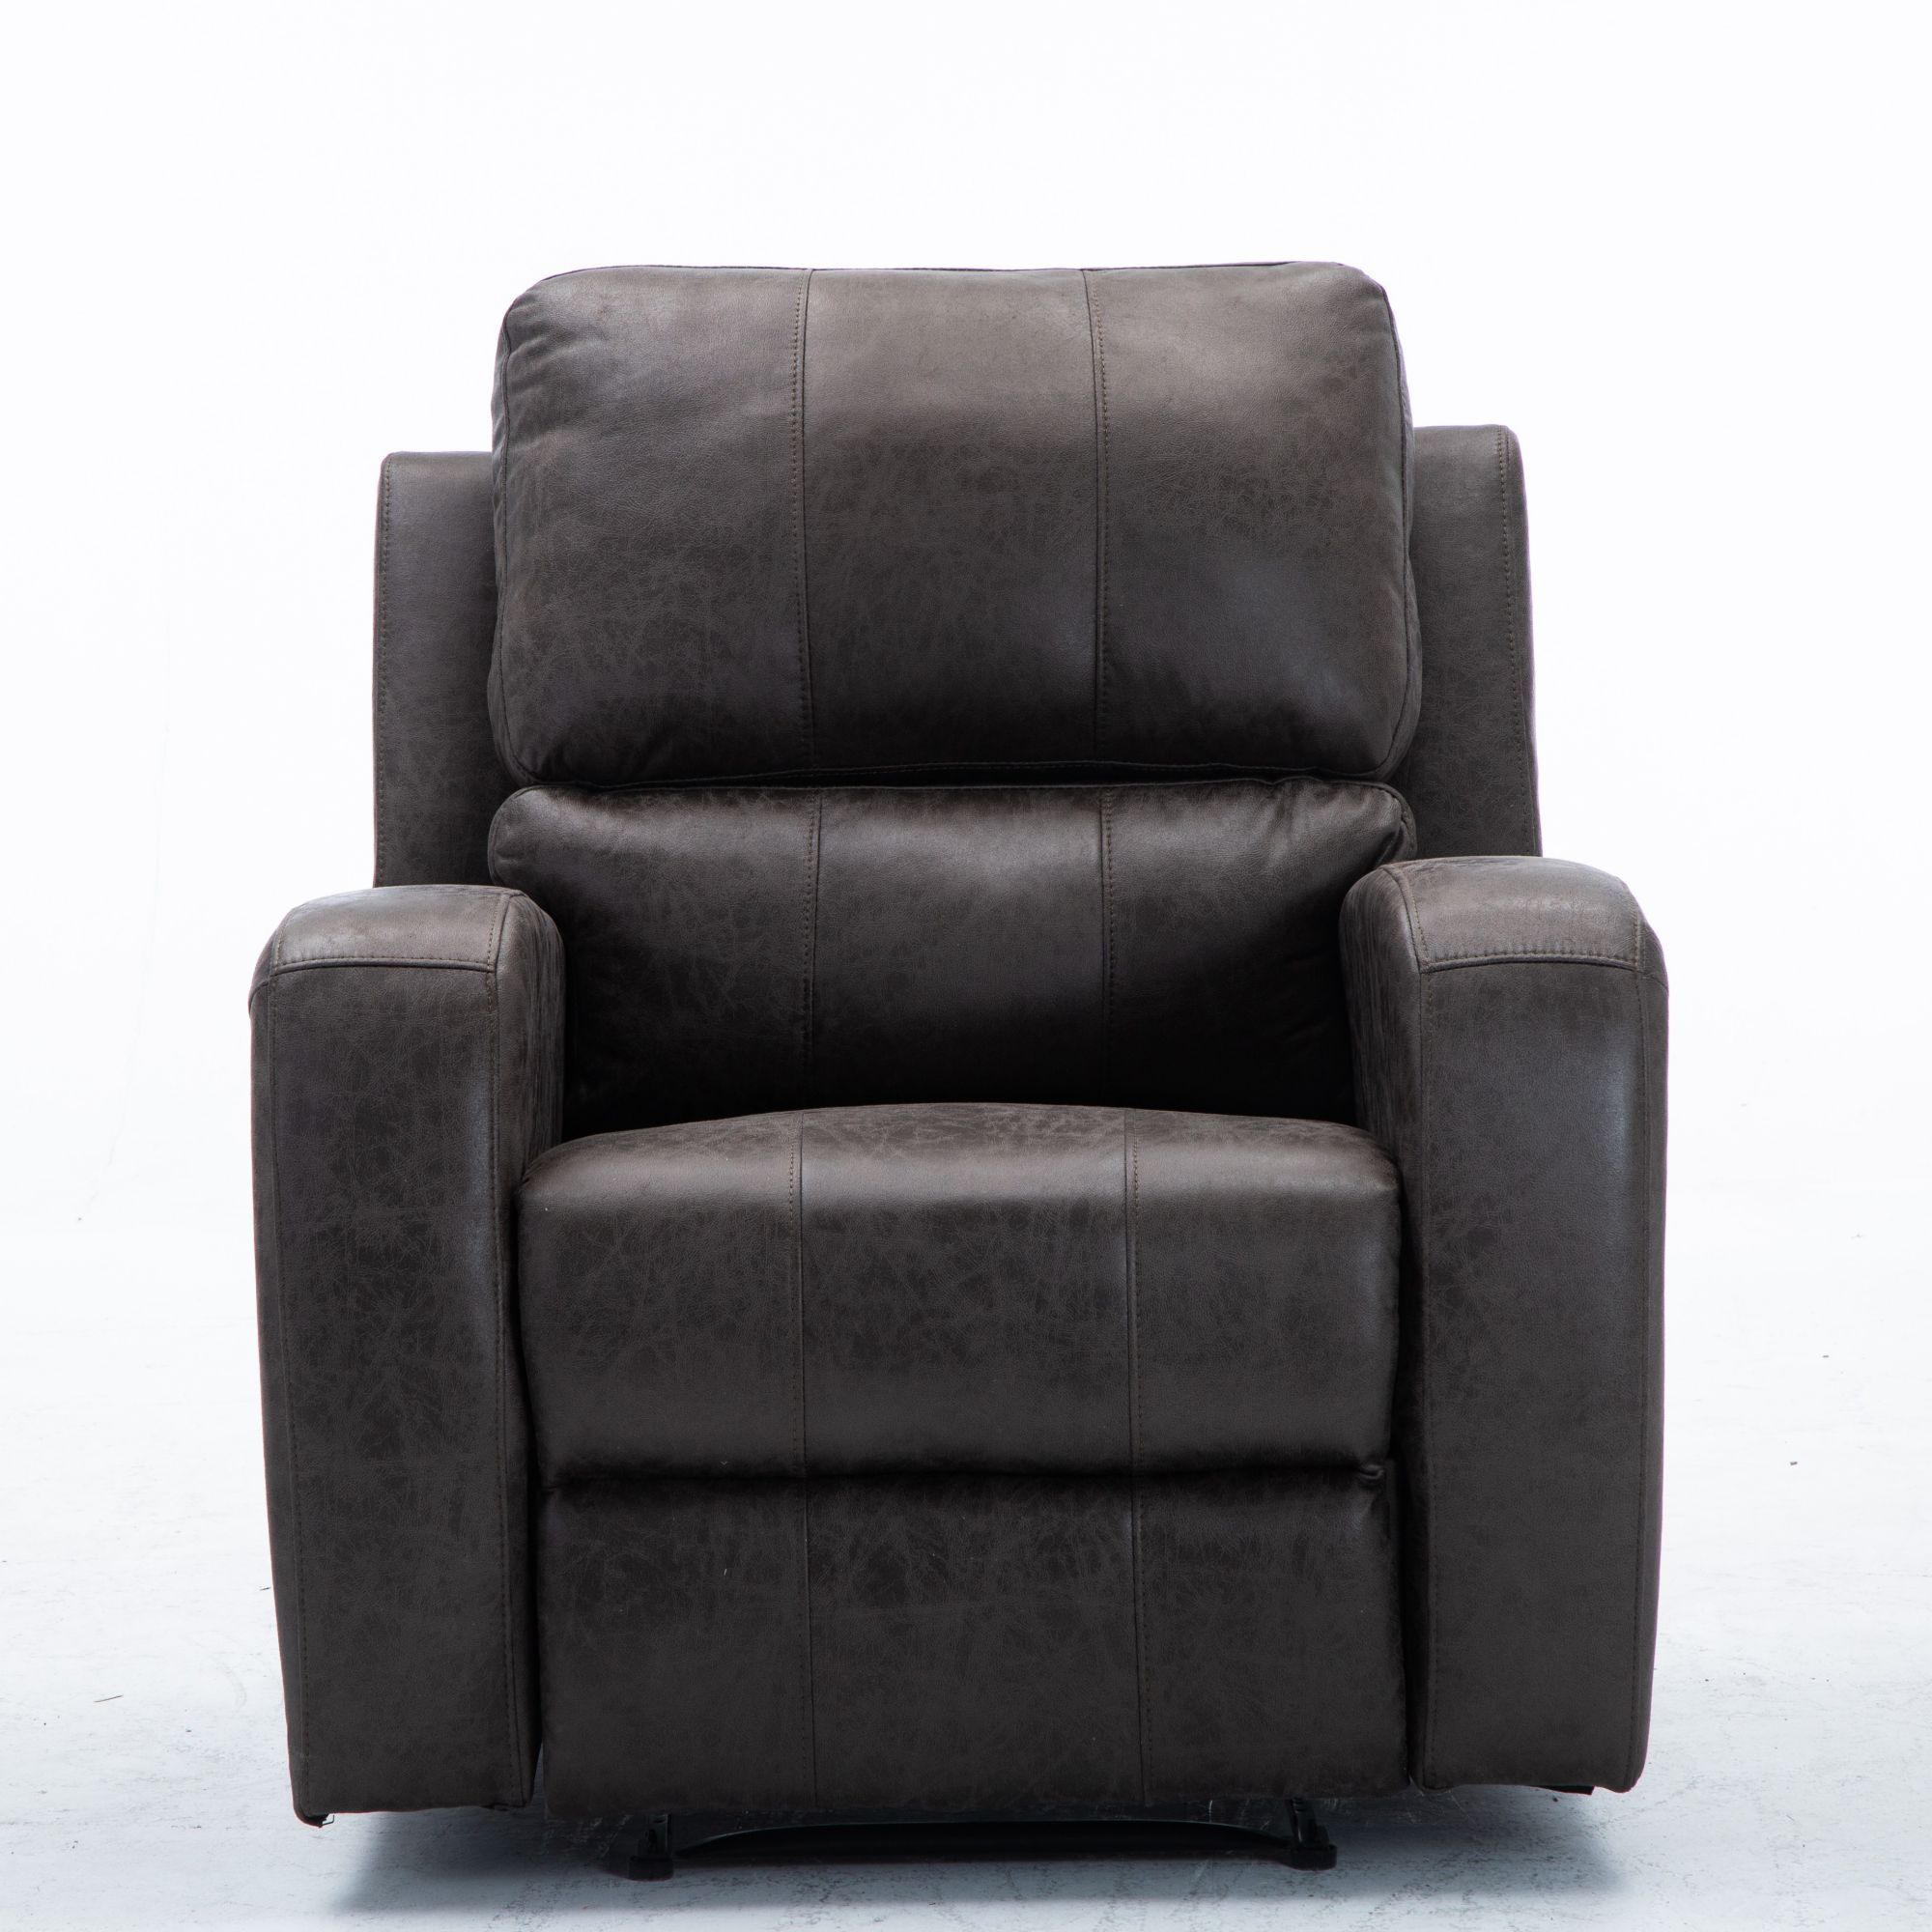 Power Recliner Chair-Comfortable Suede Leather Recliner-Power Recliner Chair with USB Charge Port-Overstuffed Home Theater Seating-Single Sofa for Living Room and Bedroom(Smoky Grey)-CASAINC